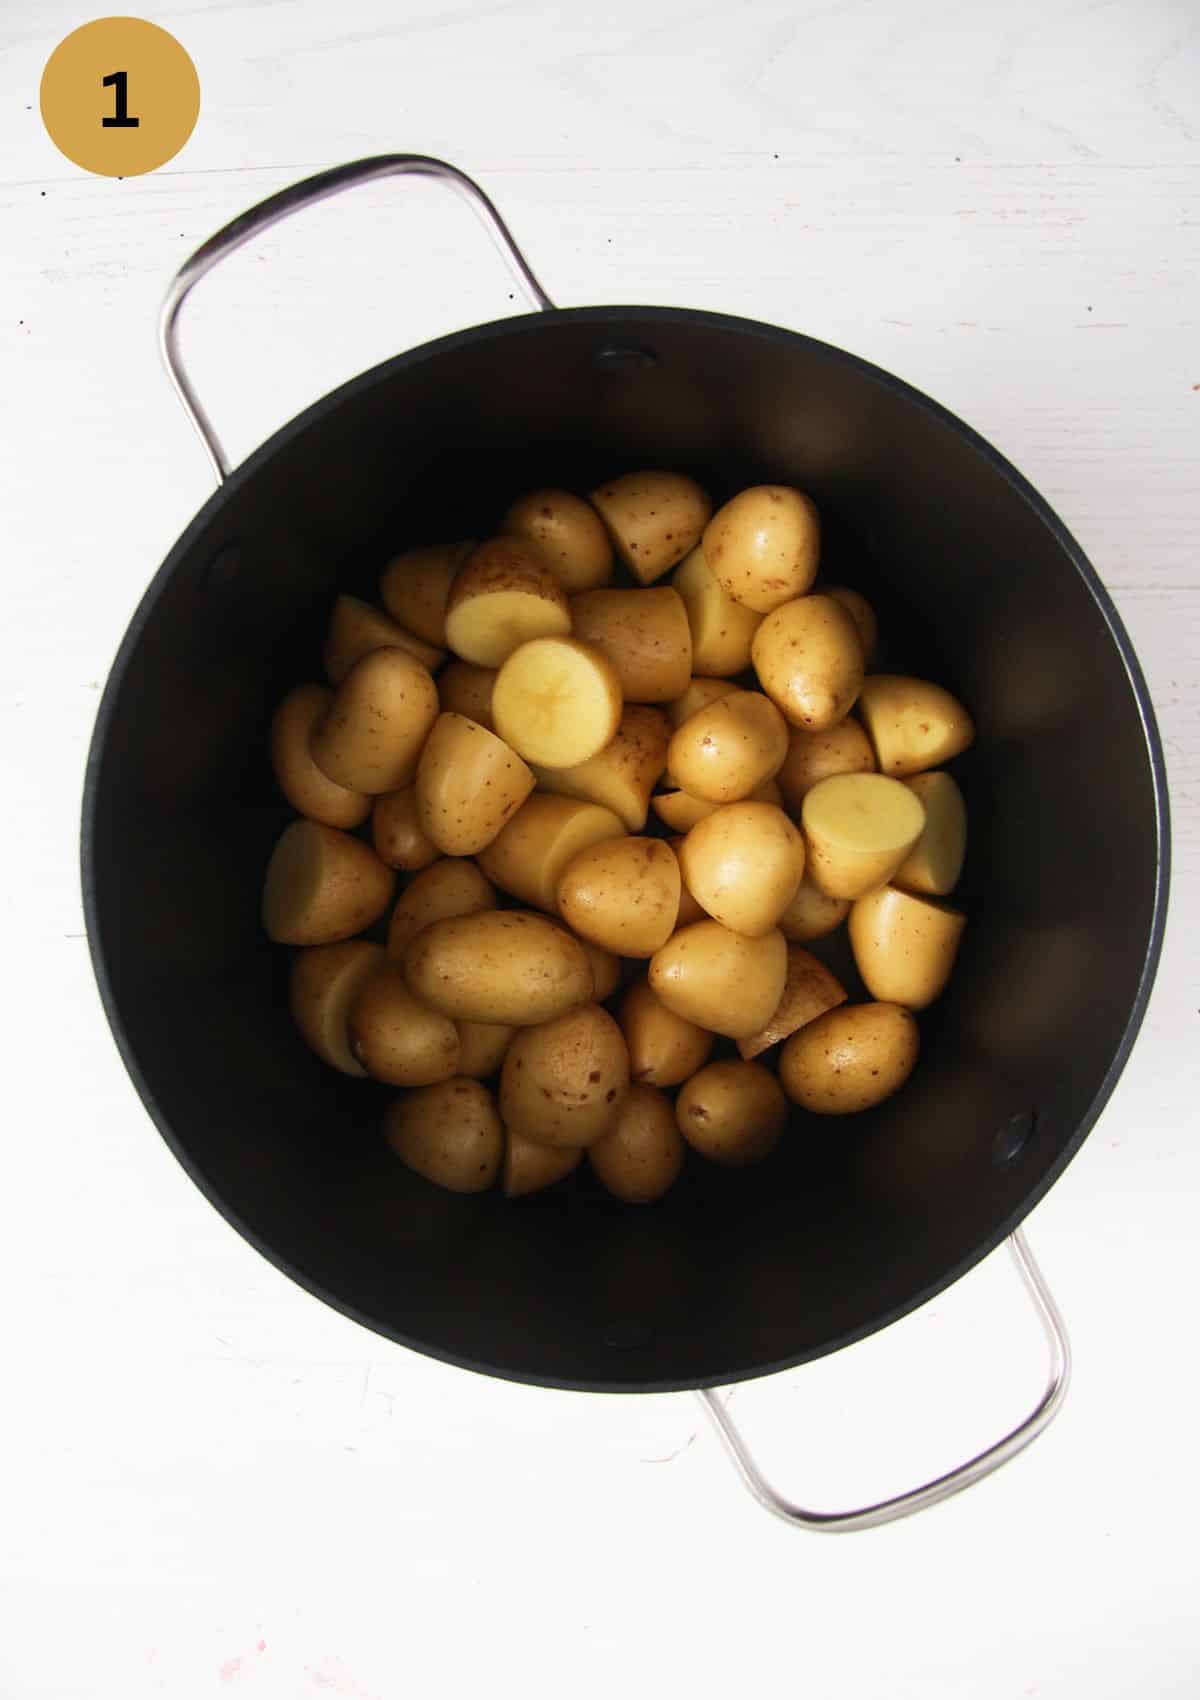 halved small potatoes in a cooking pot.